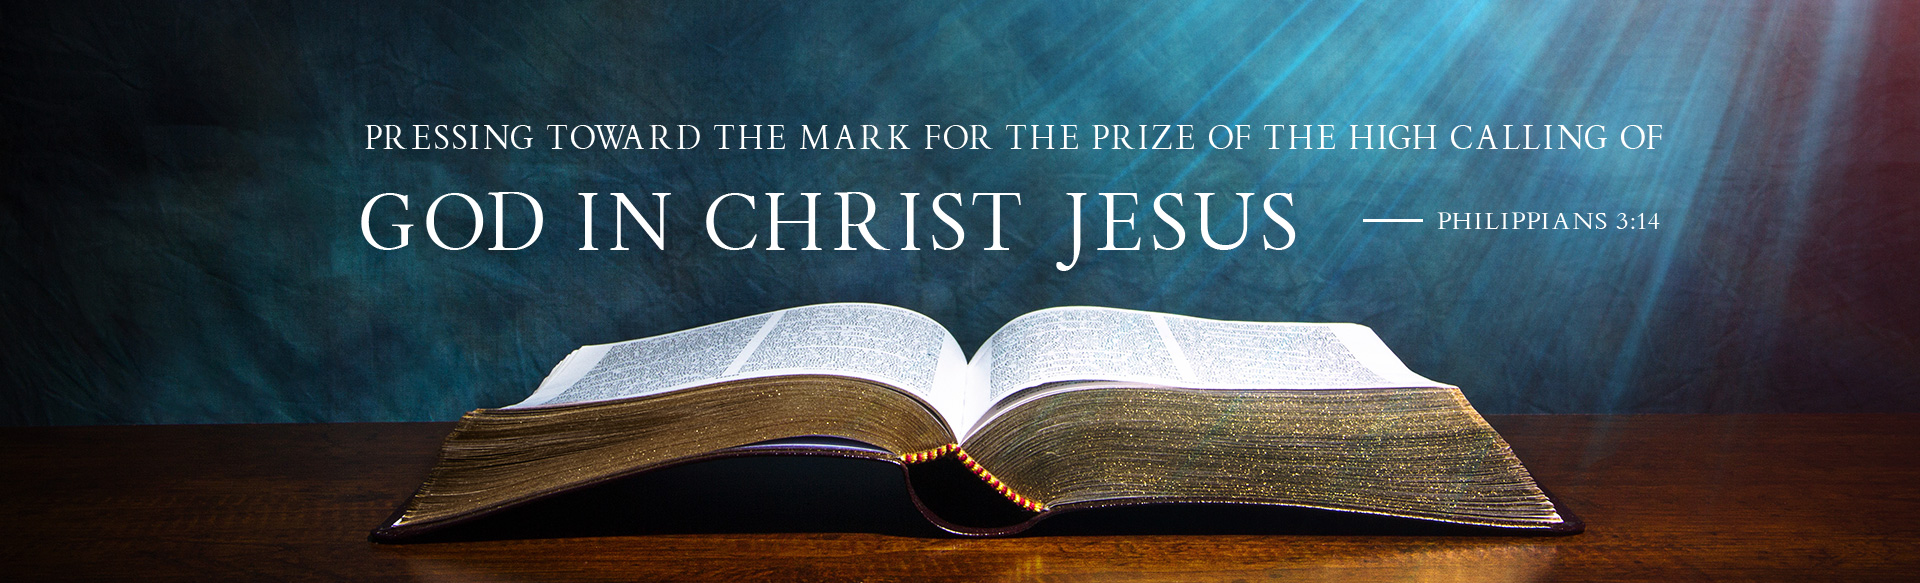 Pressing toward the mark for the prize of the high calling of God in Christ Jesus